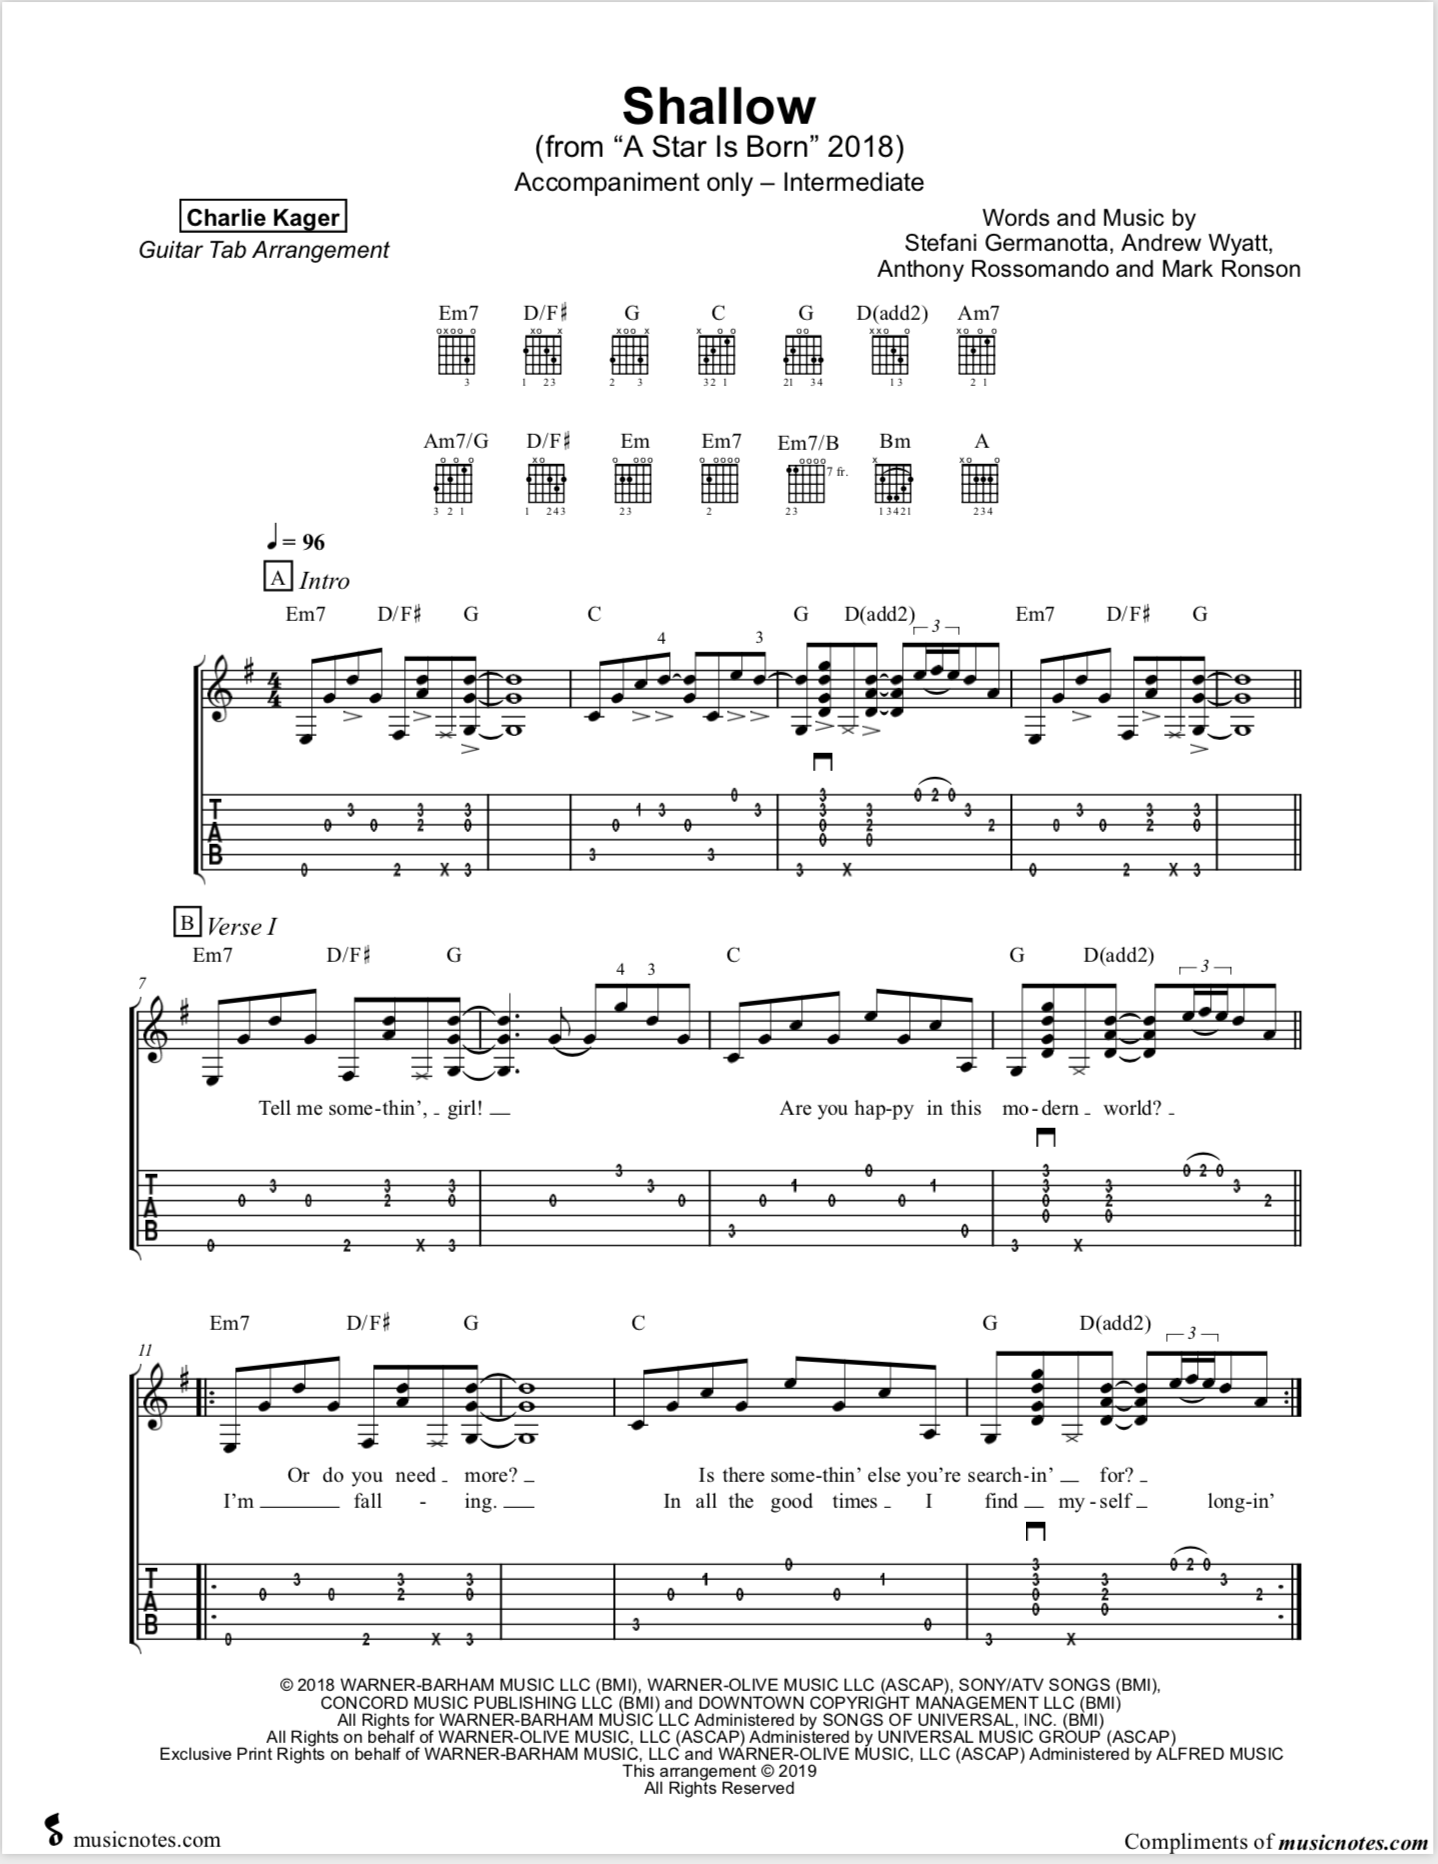 Music Instrument Shallow Guitar Tab Intro Learn to play with piano, guitar and ukulele in minutes. music instrument shallow guitar tab intro